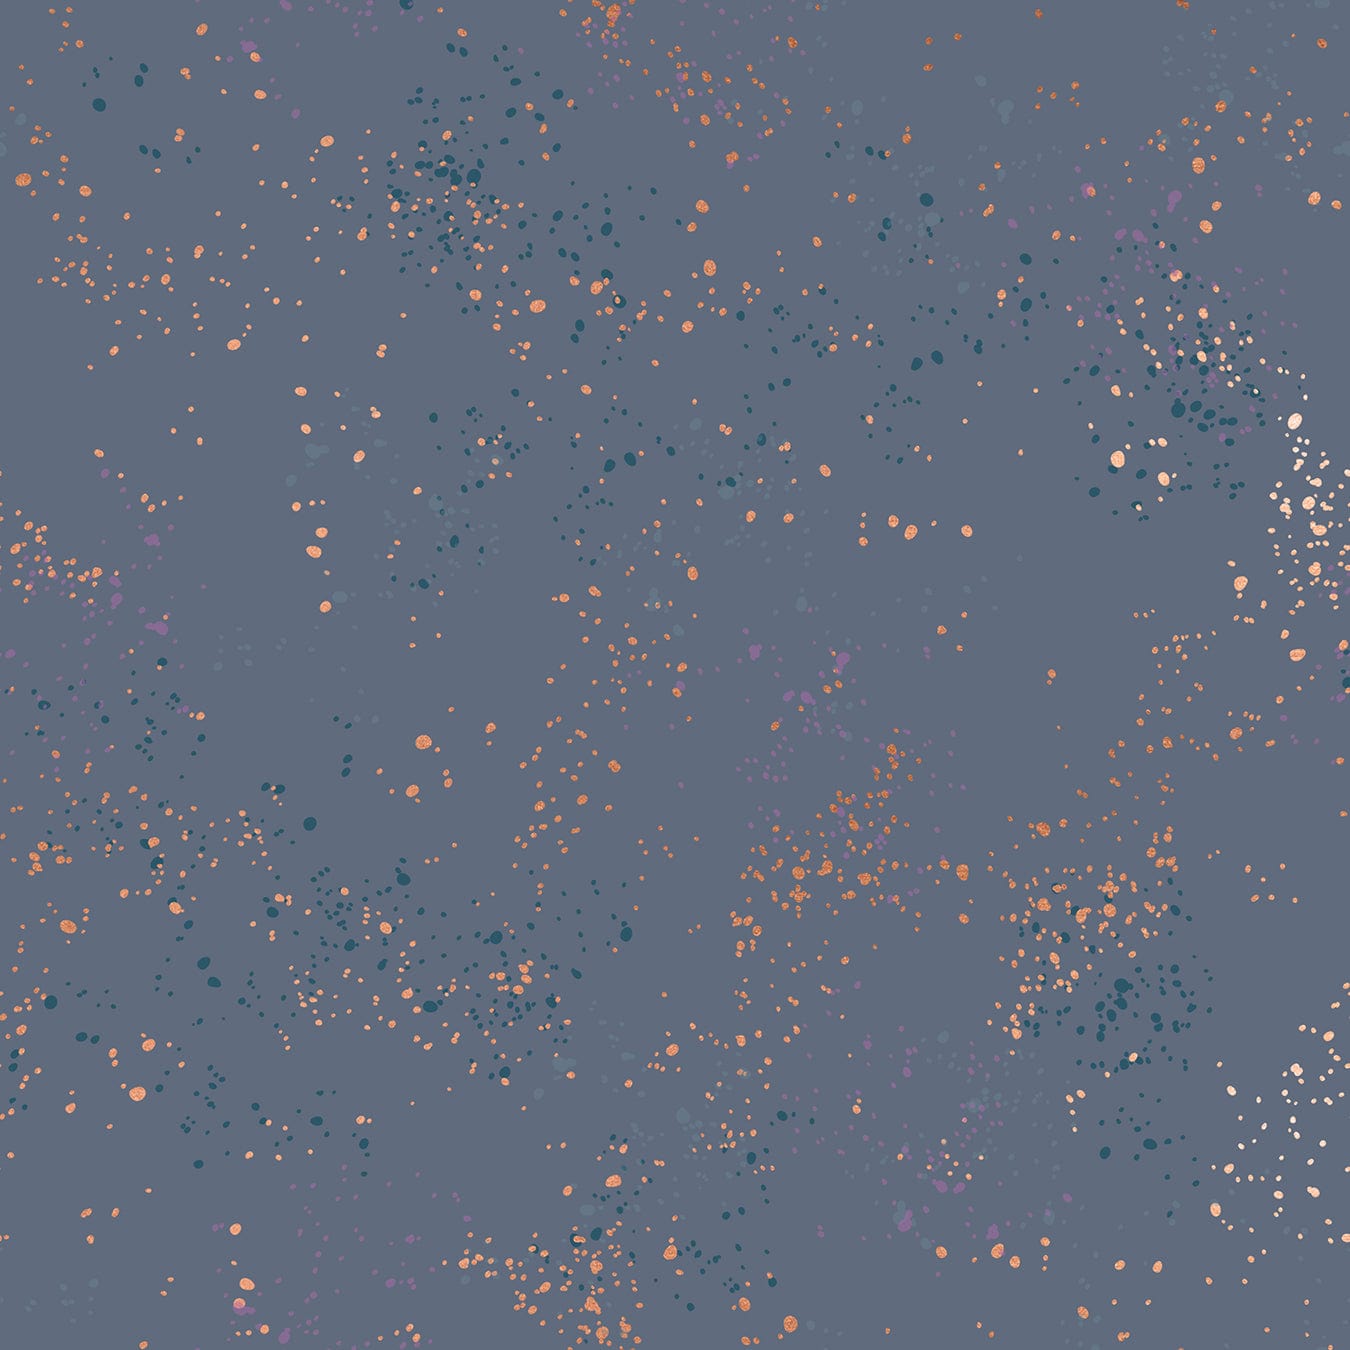 Ruby Star Fabric Speckled Metallic Blue Slate RS5027 108M